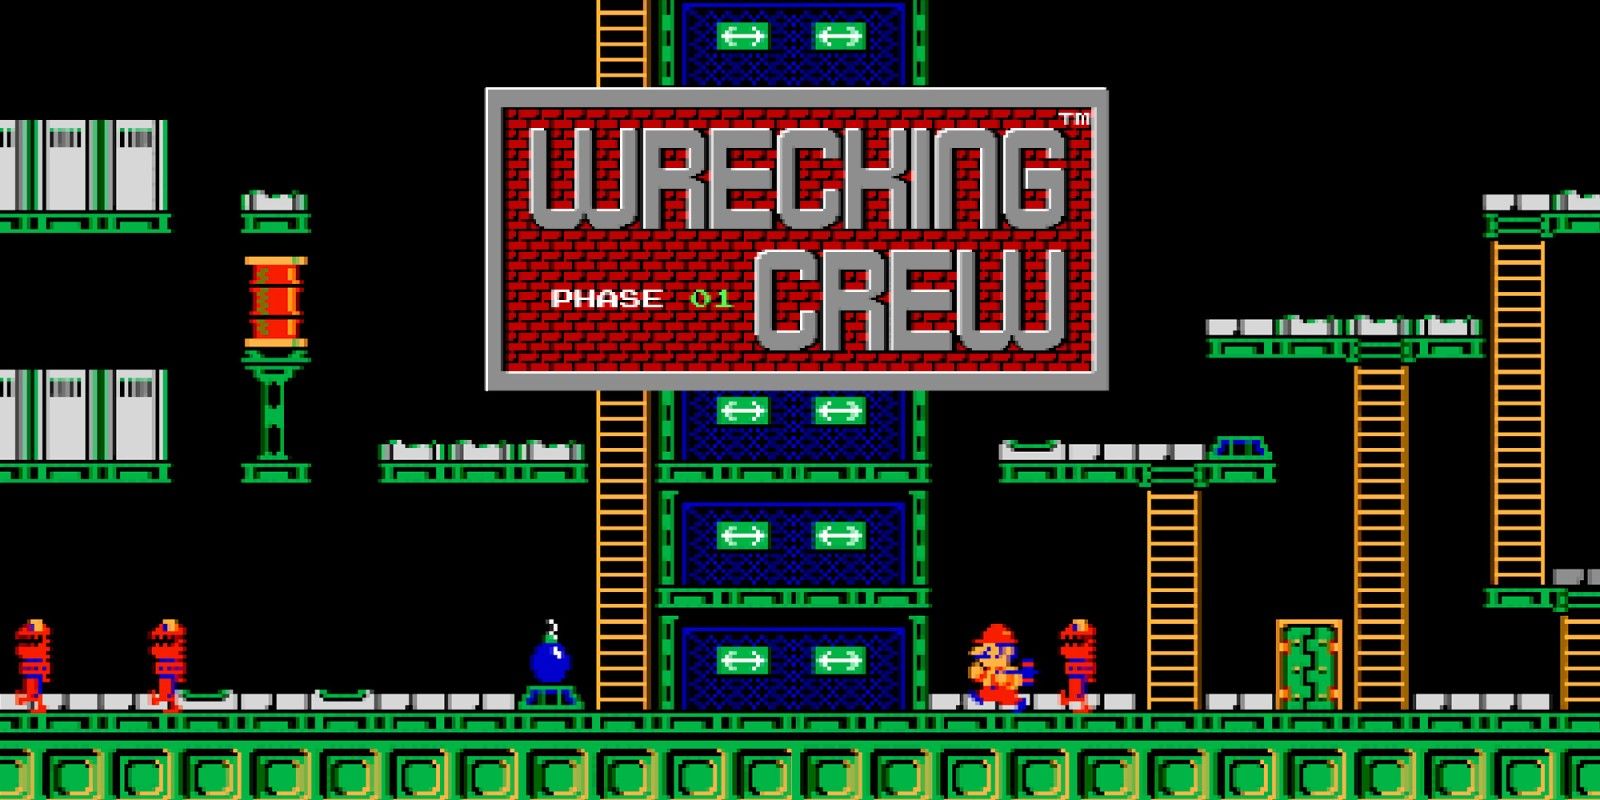 The title screen of the NES game Wrecking Crew.